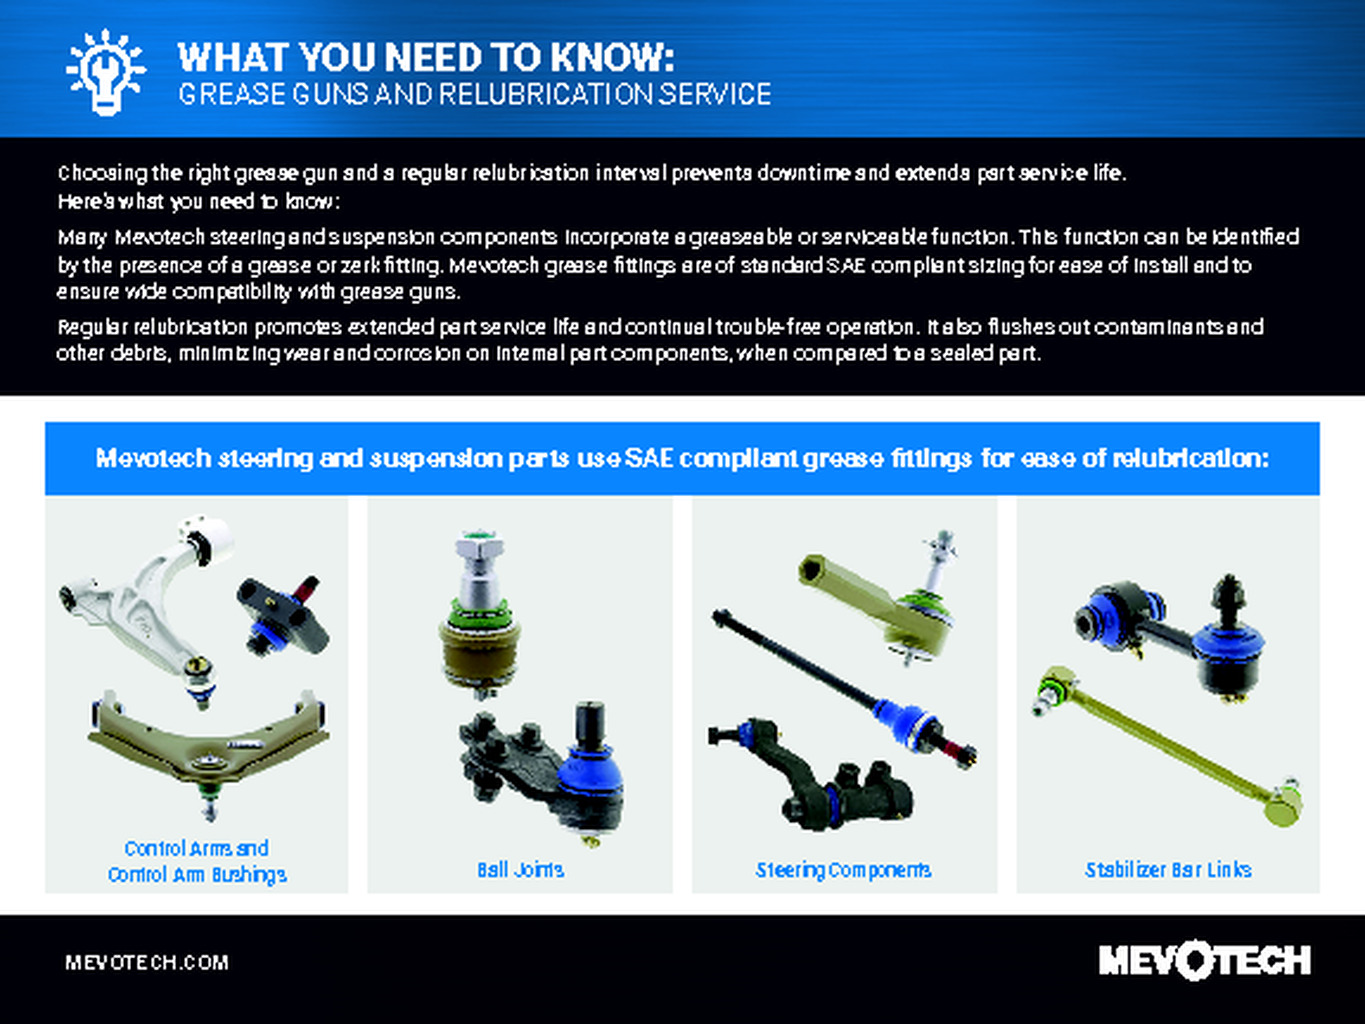 WHAT YOU NEED TO KNOW:  GREASE GUNS AND RELUBRICATION SERVICE